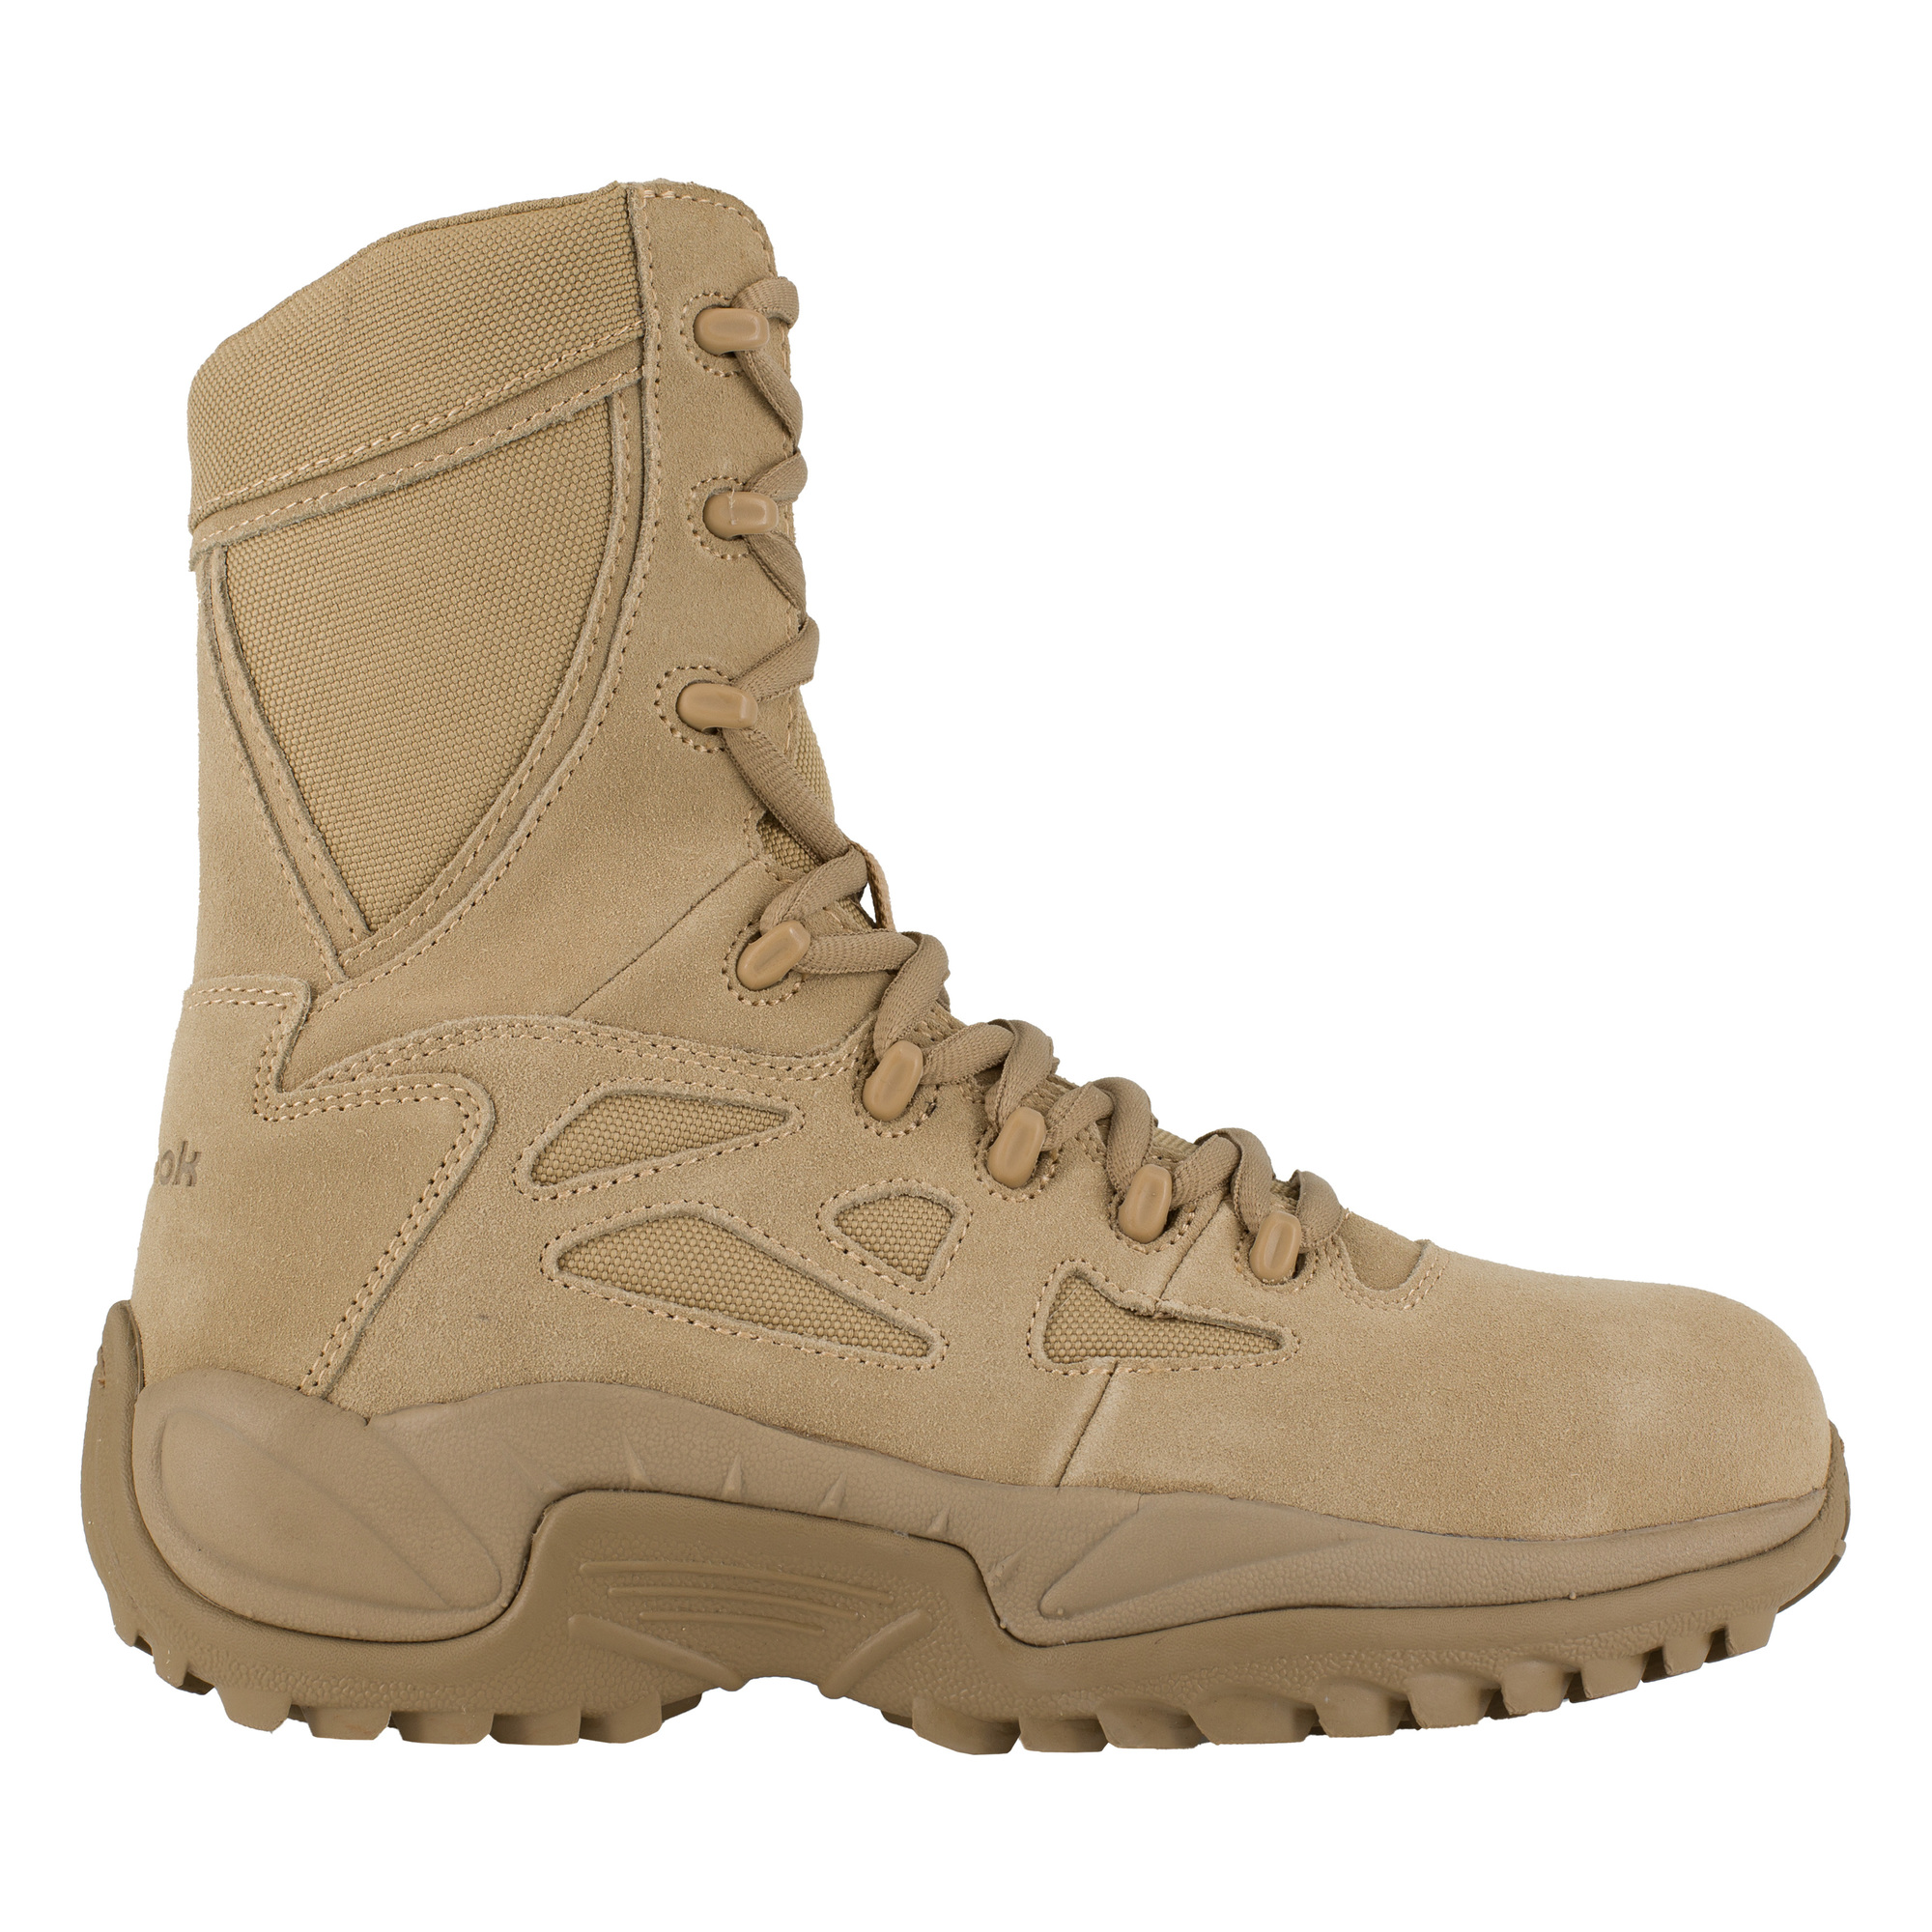 Reebok, 8Inch Stealth Tactical Boot with Side Zipper, Size 5, Width Wide, Color Desert Tan, Model RB894 -  RB894-W-05.0